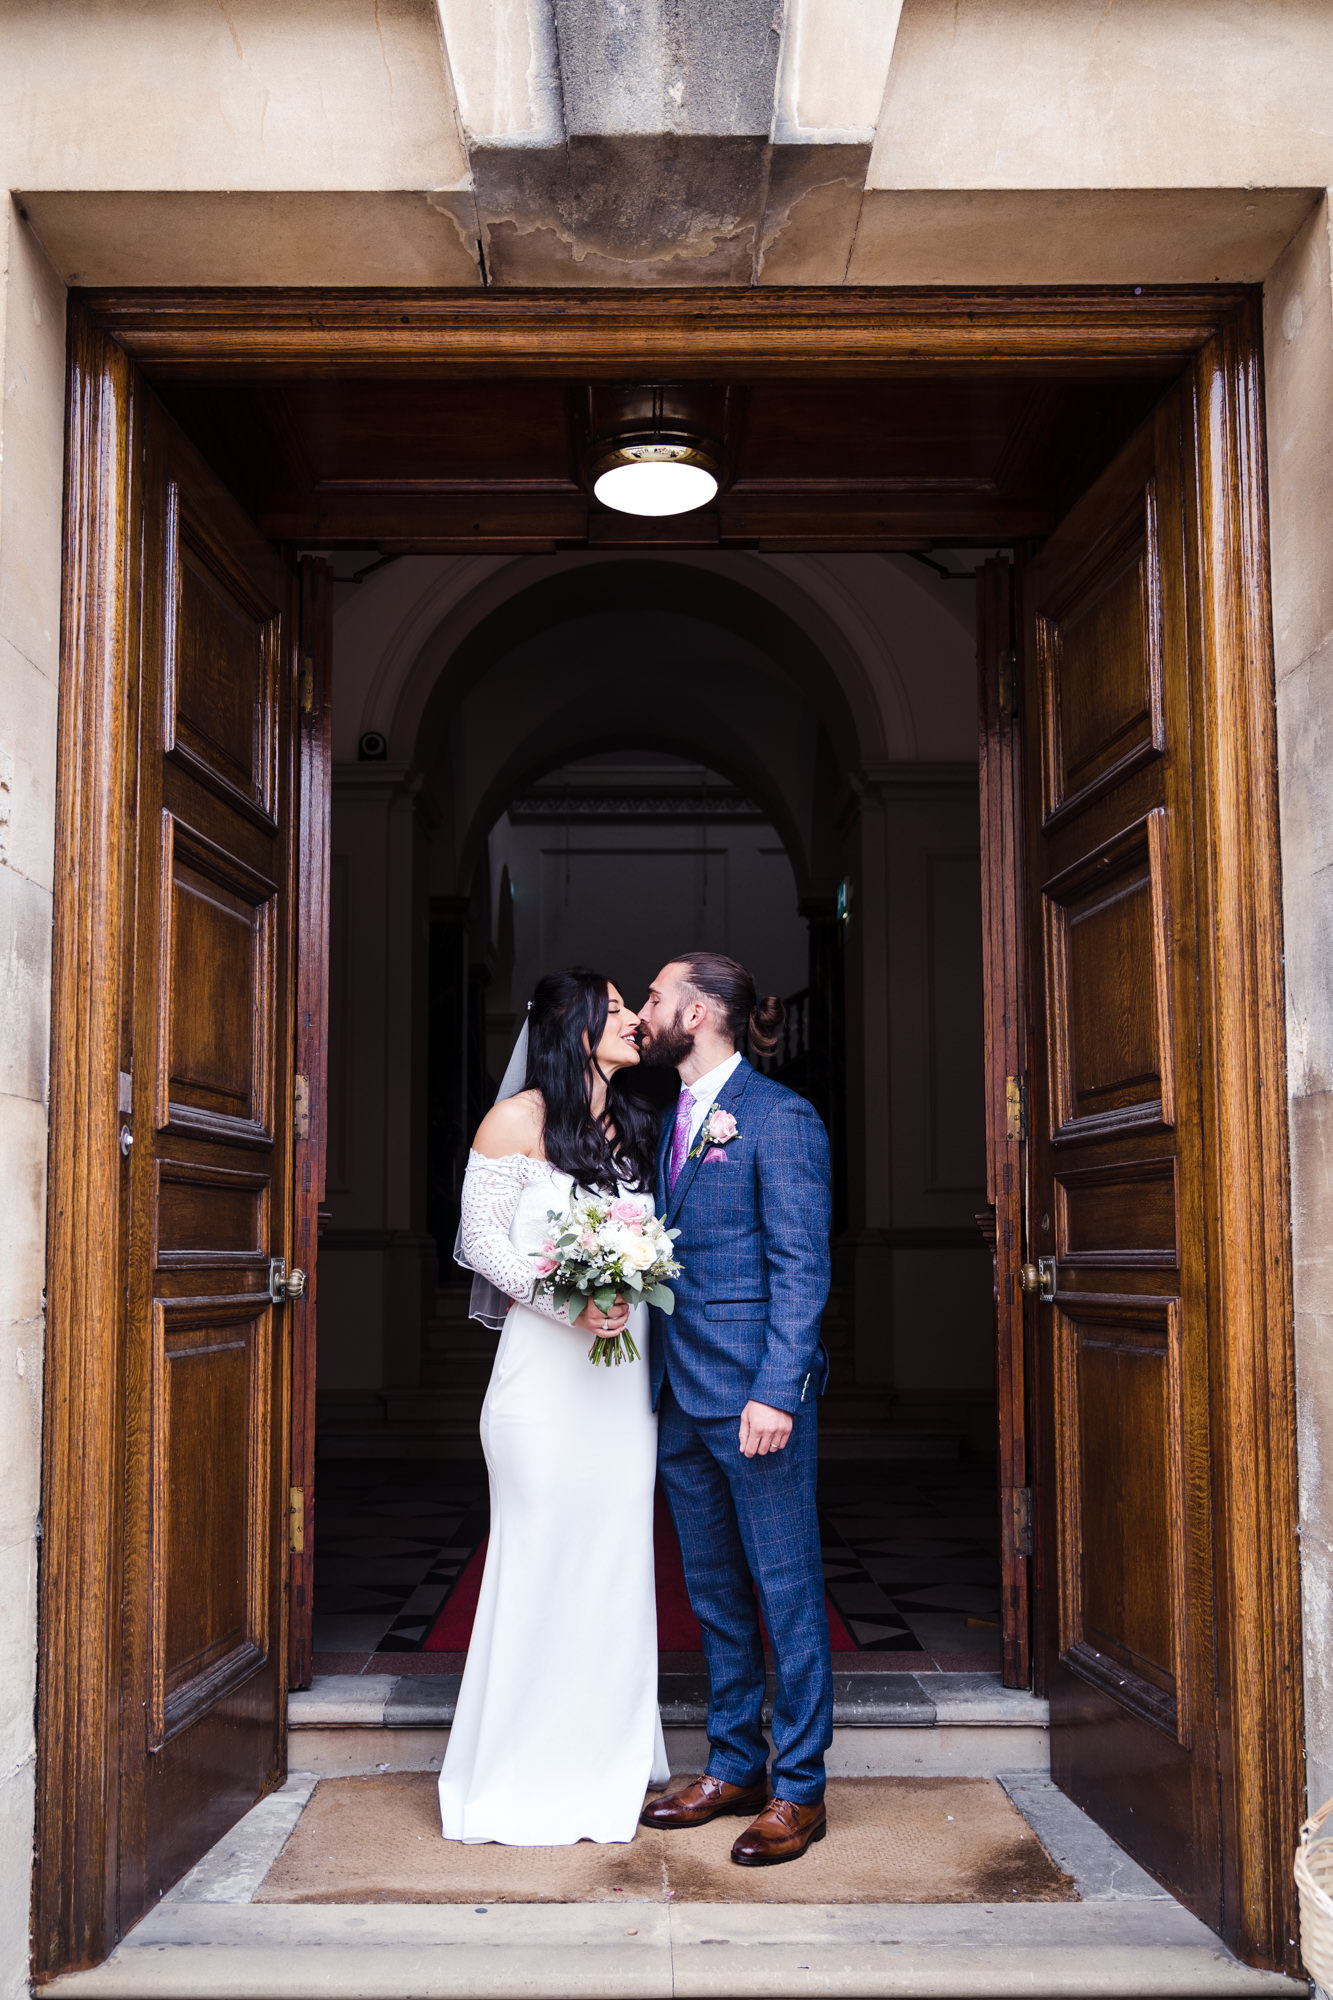 bride and groom pose for a picture as they exit the bath guildhall underneath a tall wooden door